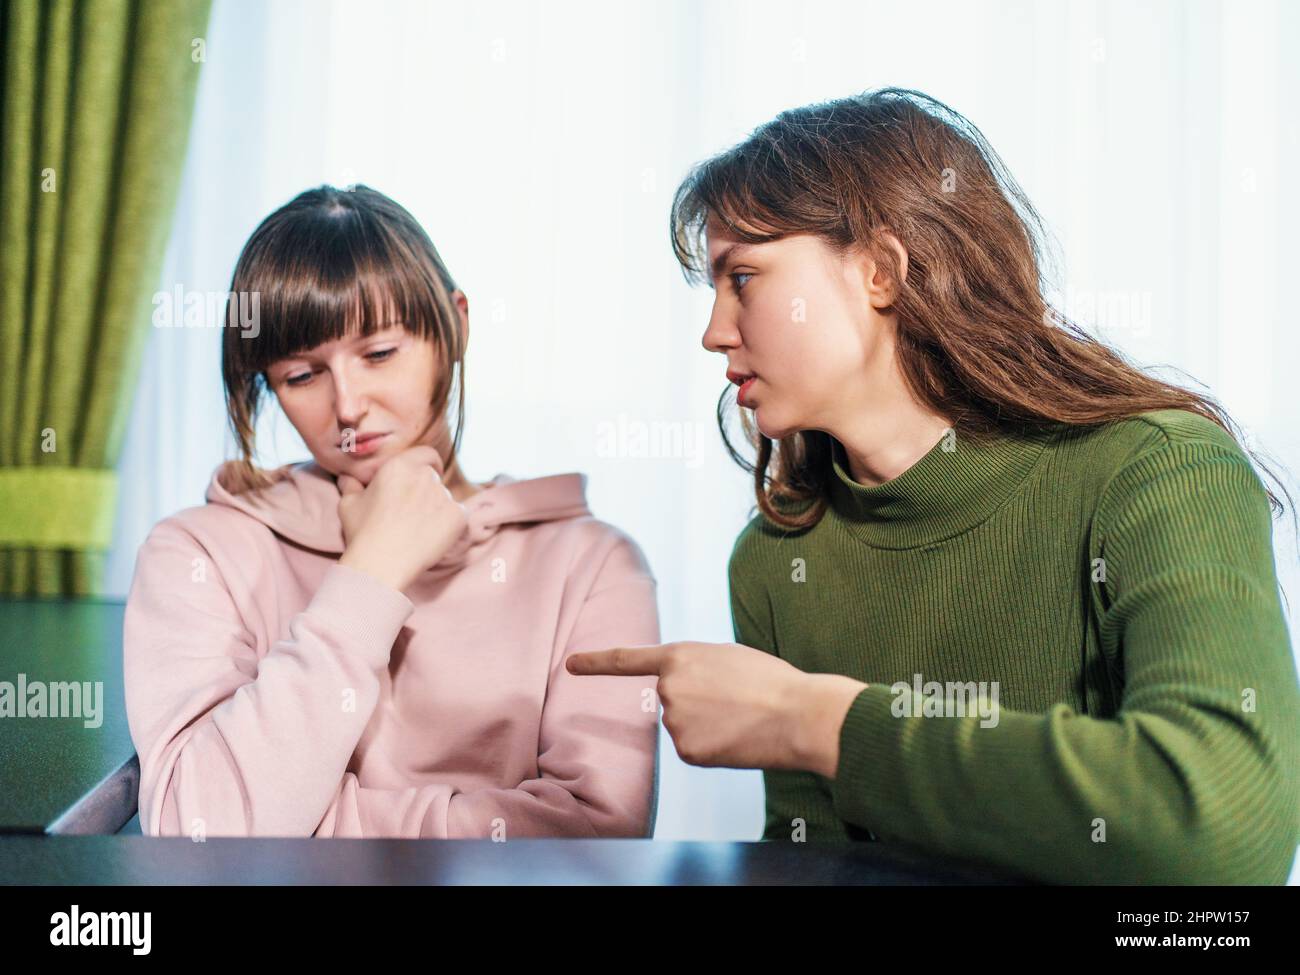 Young angry girl scolding or arguing her sad upset girlfriend, waving hand and poking her finger. Abuse and conflict relationship concept. Stock Photo